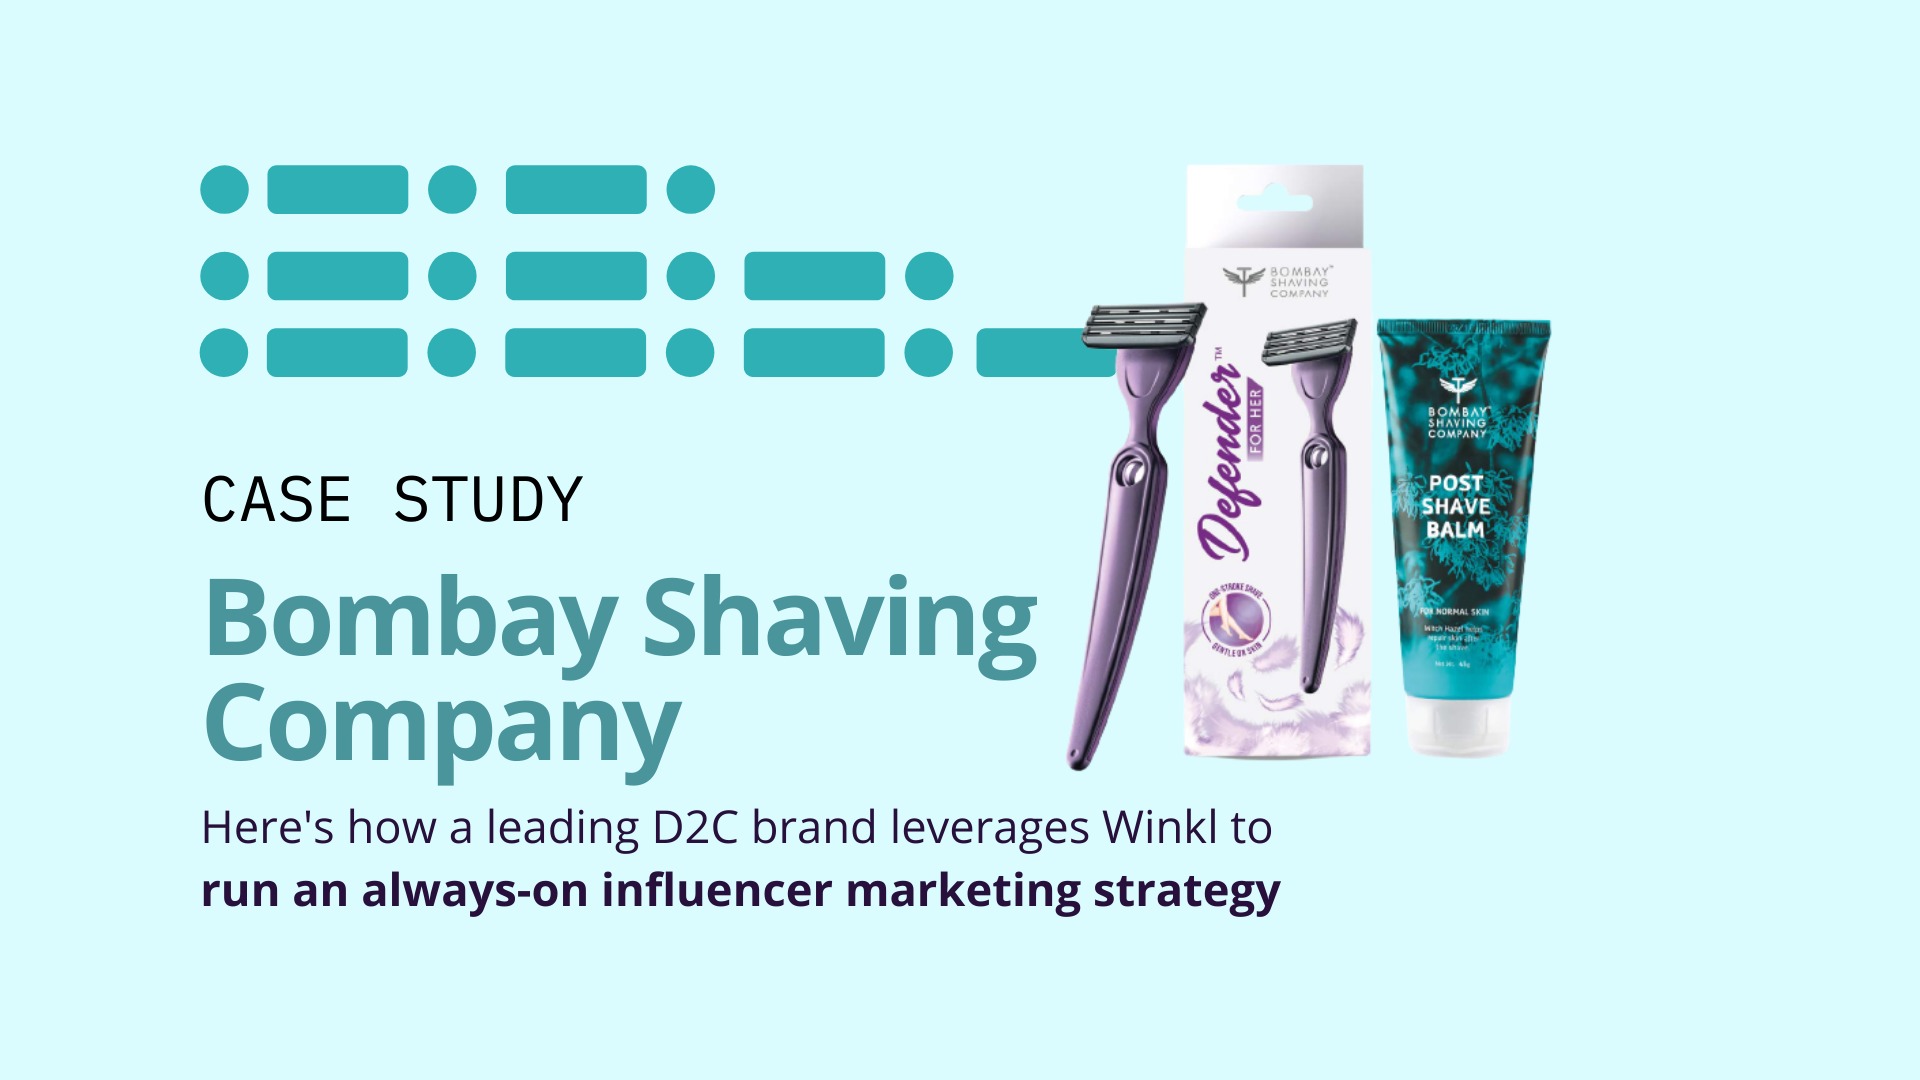 How Bombay Shaving Company leverages Winkl to run an always-on influencer marketing strategy image